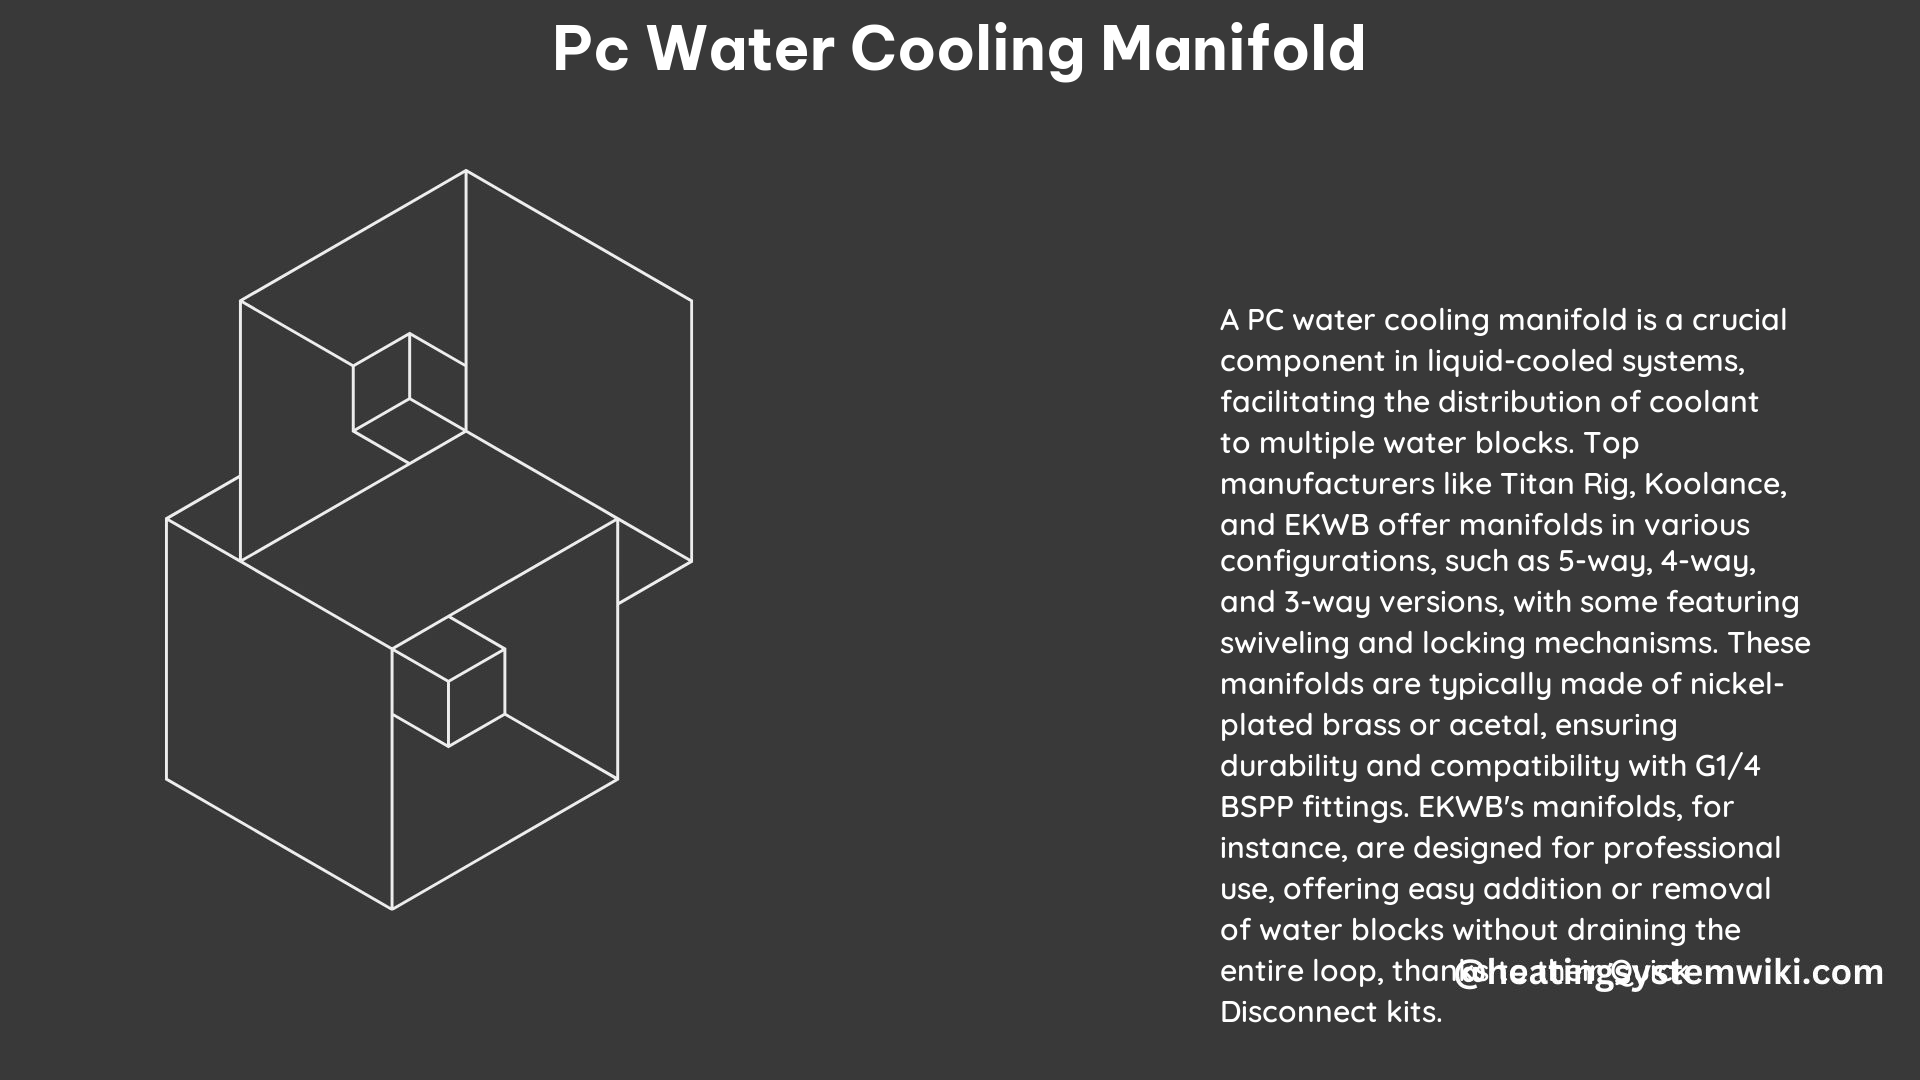 PC Water Cooling Manifold